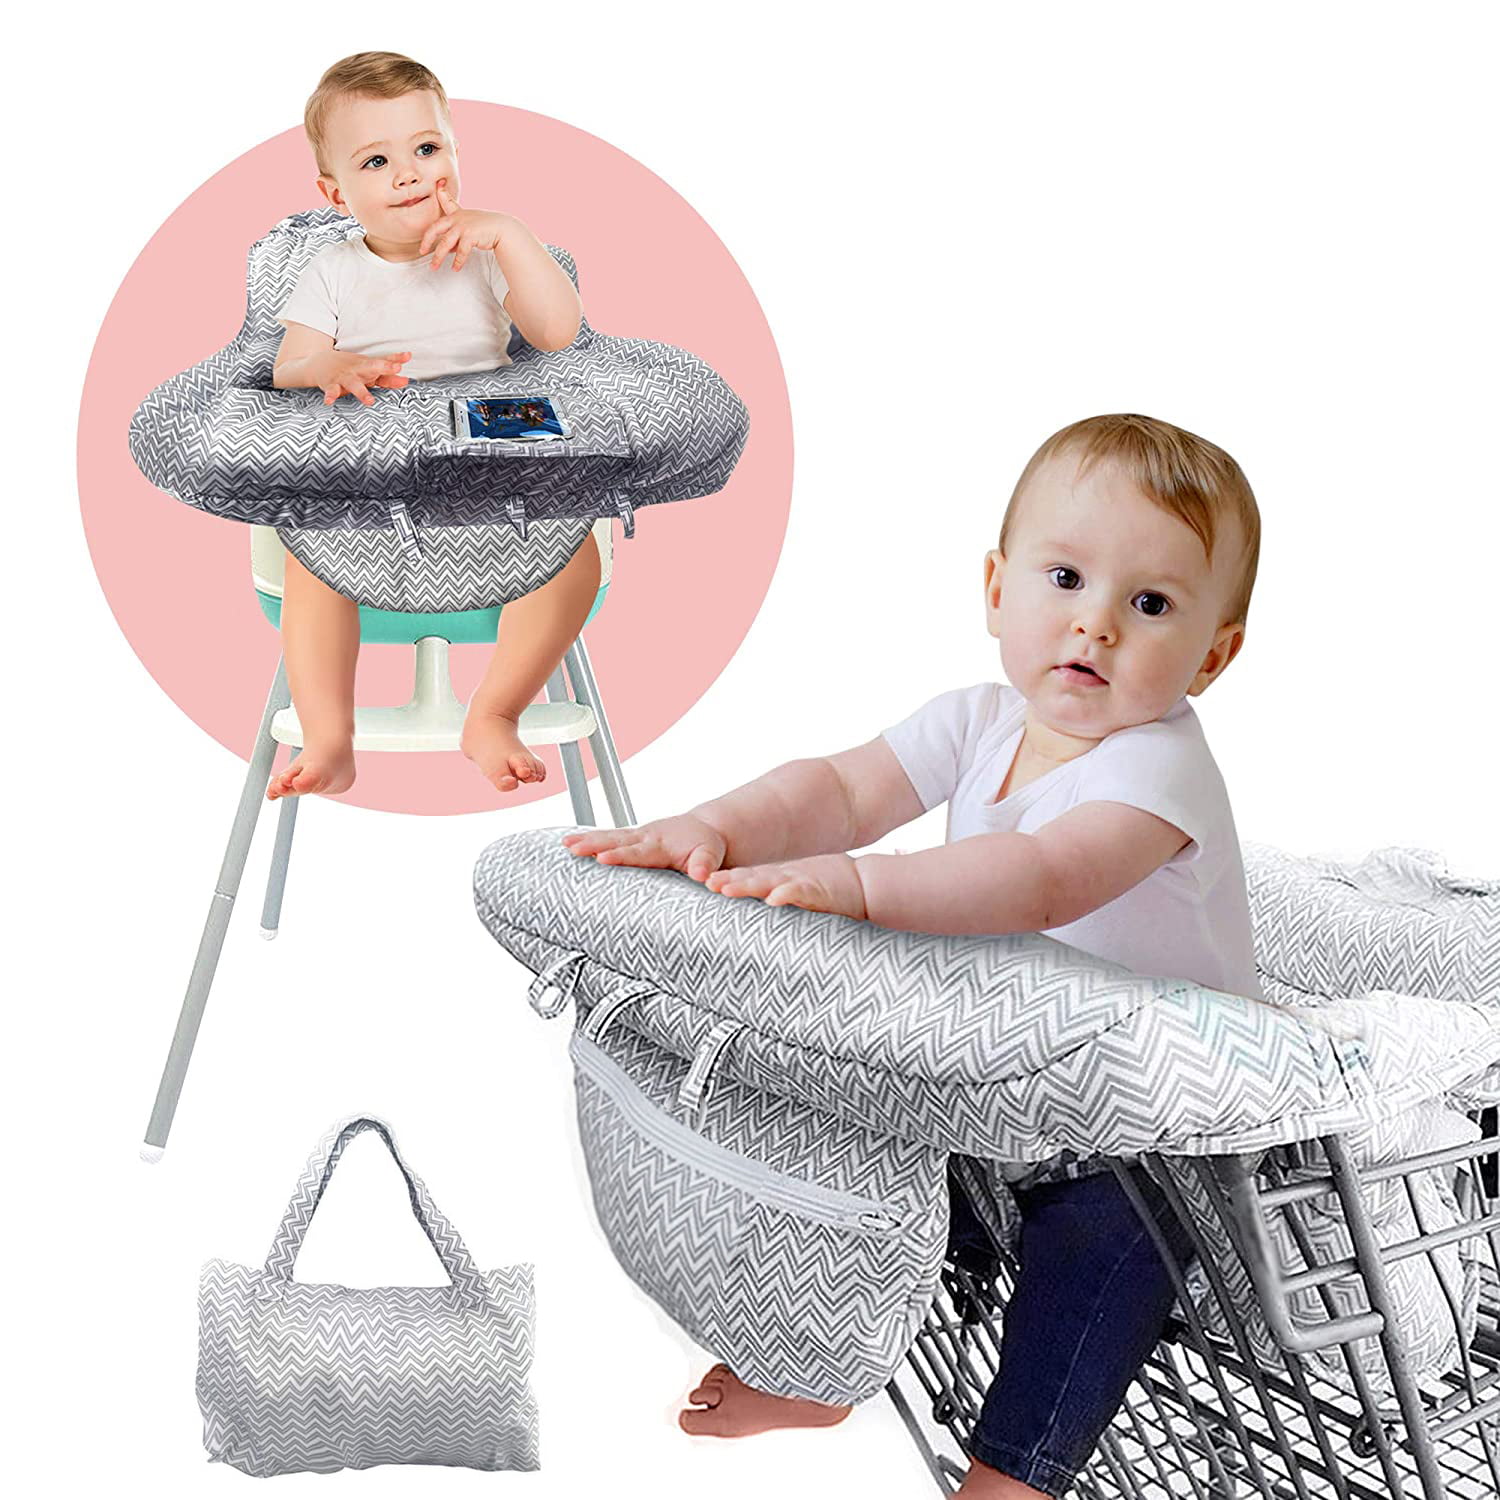 Unisex-Babys 2-in-1 Shopping Cart Cover and High Chair Cover with Fold-able Bag Starfish Universal Size 